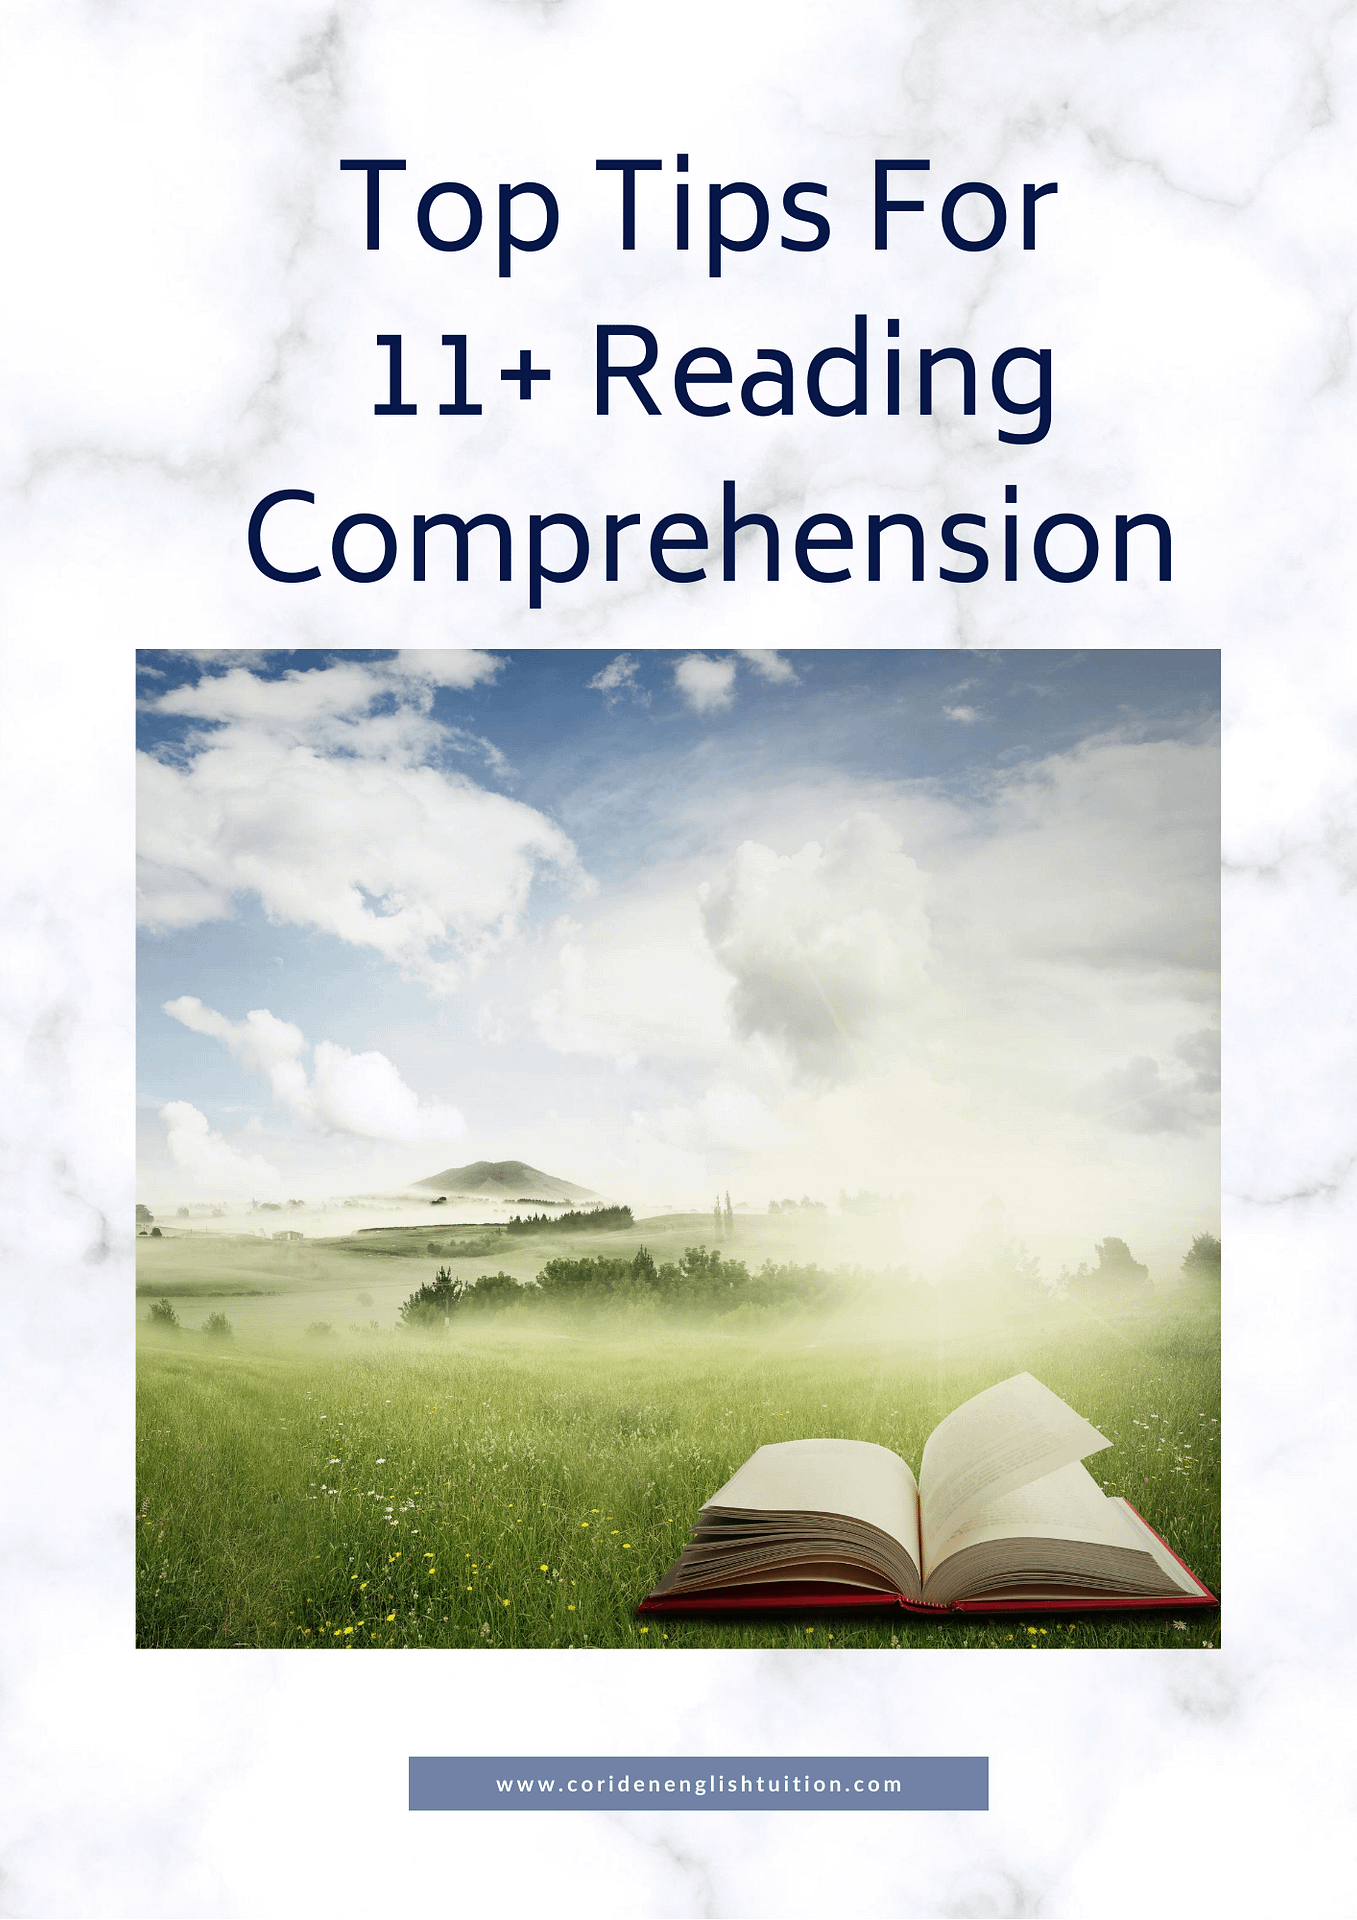 TOP TIPS FOR 11+ READING COMPREHENSION